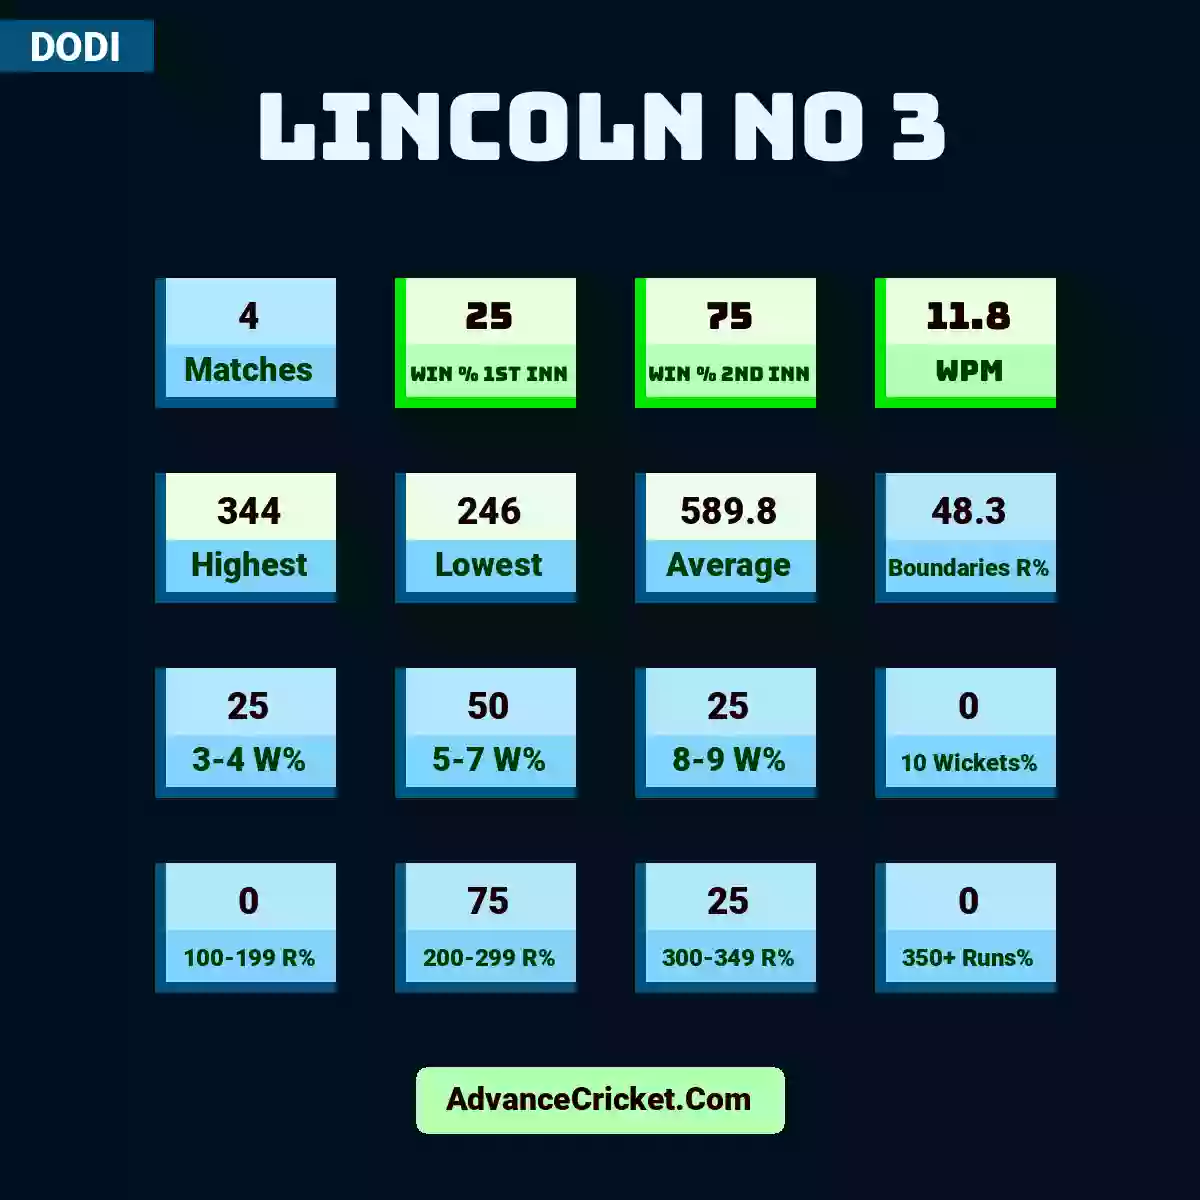 Image showing Lincoln No 3 with Matches: 4, Win % 1st Inn: 25, Win % 2nd Inn: 75, WPM: 11.8, Highest: 344, Lowest: 246, Average: 589.8, Boundaries R%: 48.3, 3-4 W%: 25, 5-7 W%: 50, 8-9 W%: 25, 10 Wickets%: 0, 100-199 R%: 0, 200-299 R%: 75, 300-349 R%: 25, 350+ Runs%: 0.